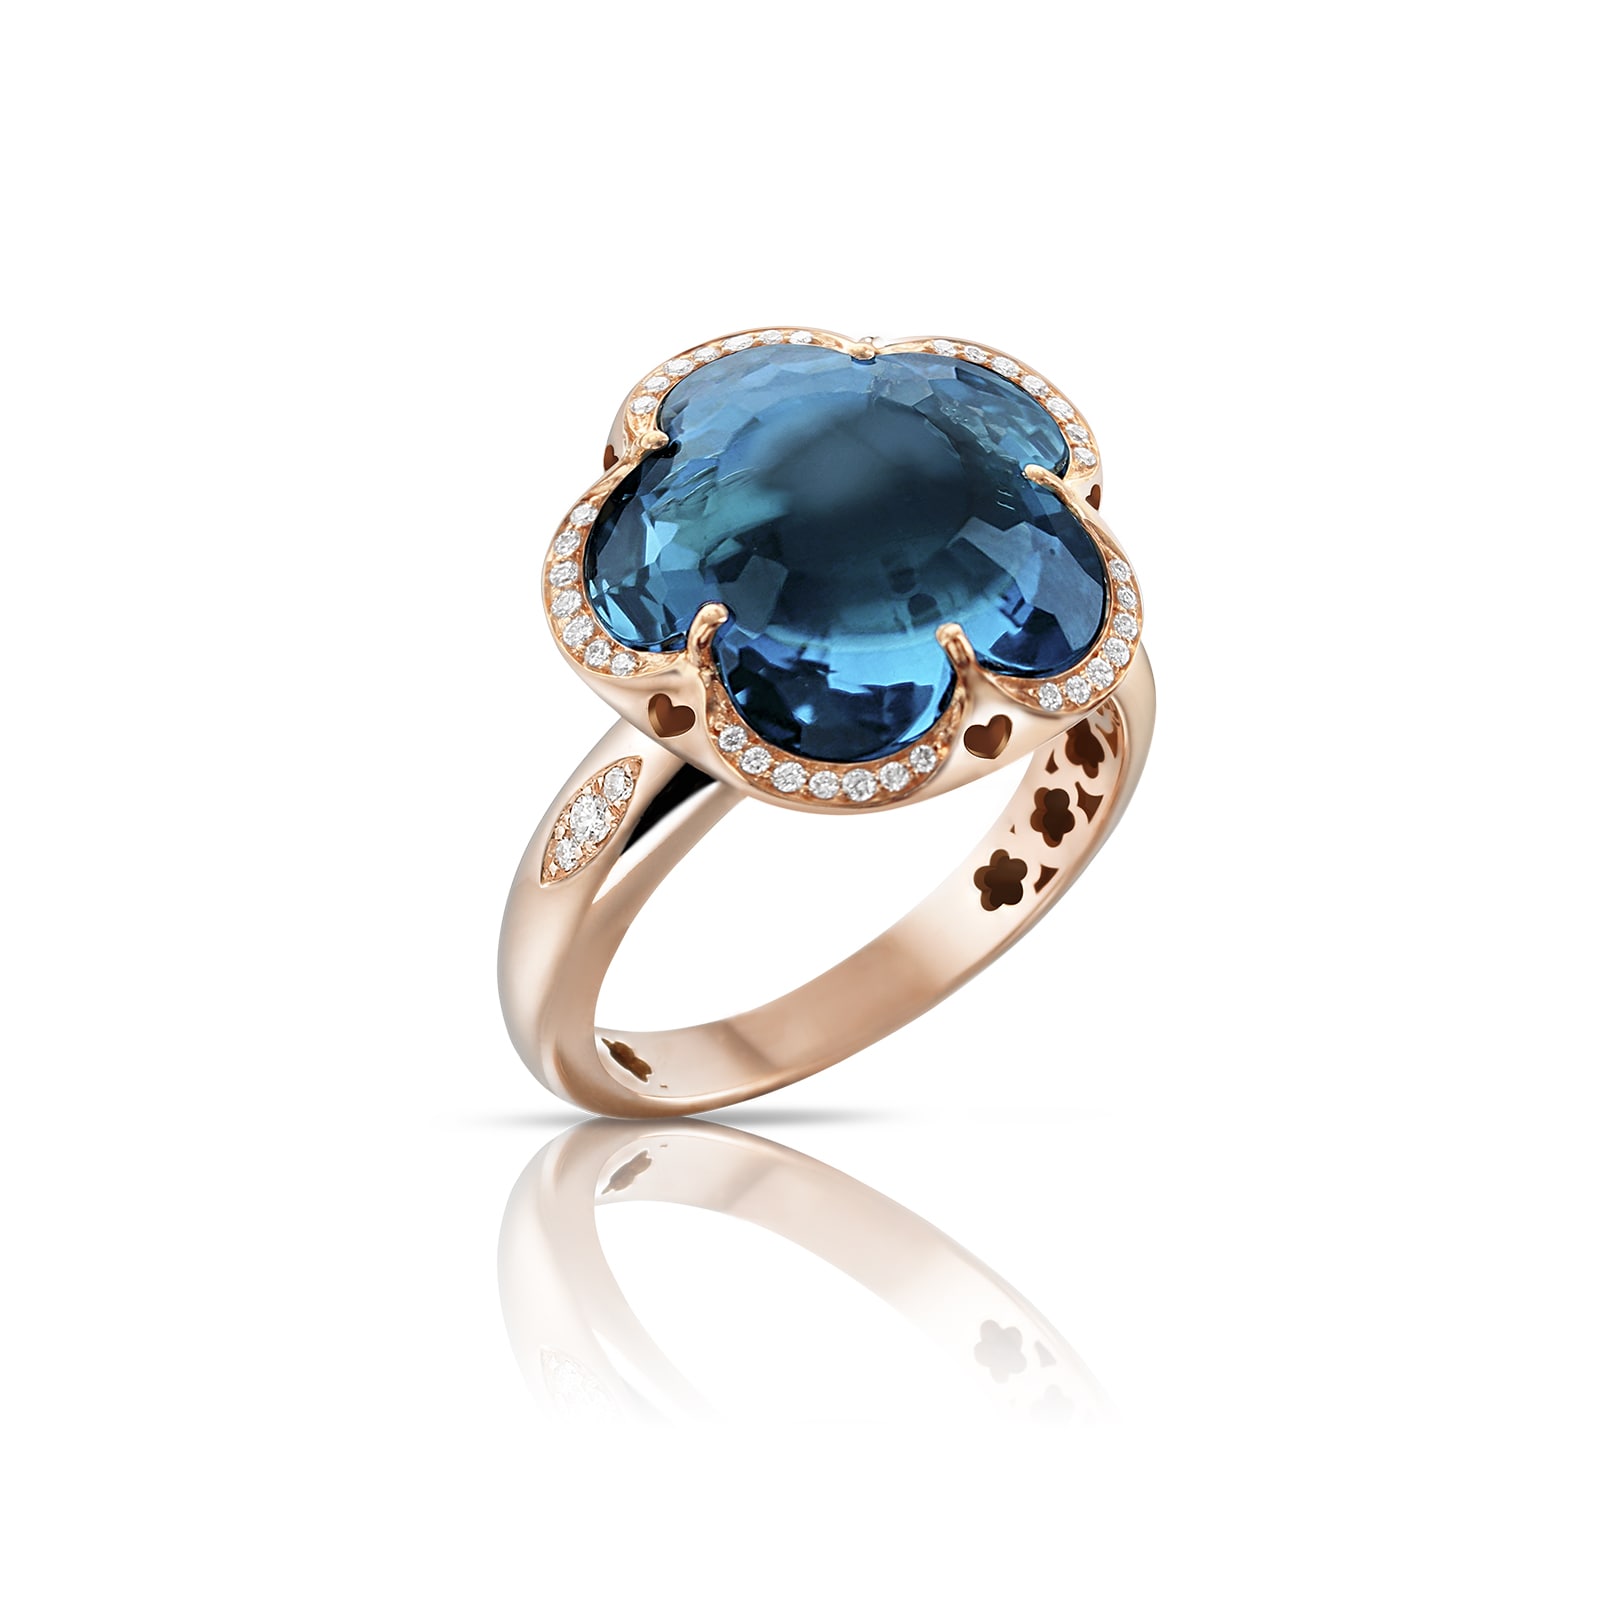 Bon Ton Ring in 18ct Rose Gold with London Blue Topaz and Diamonds - Ring Size M